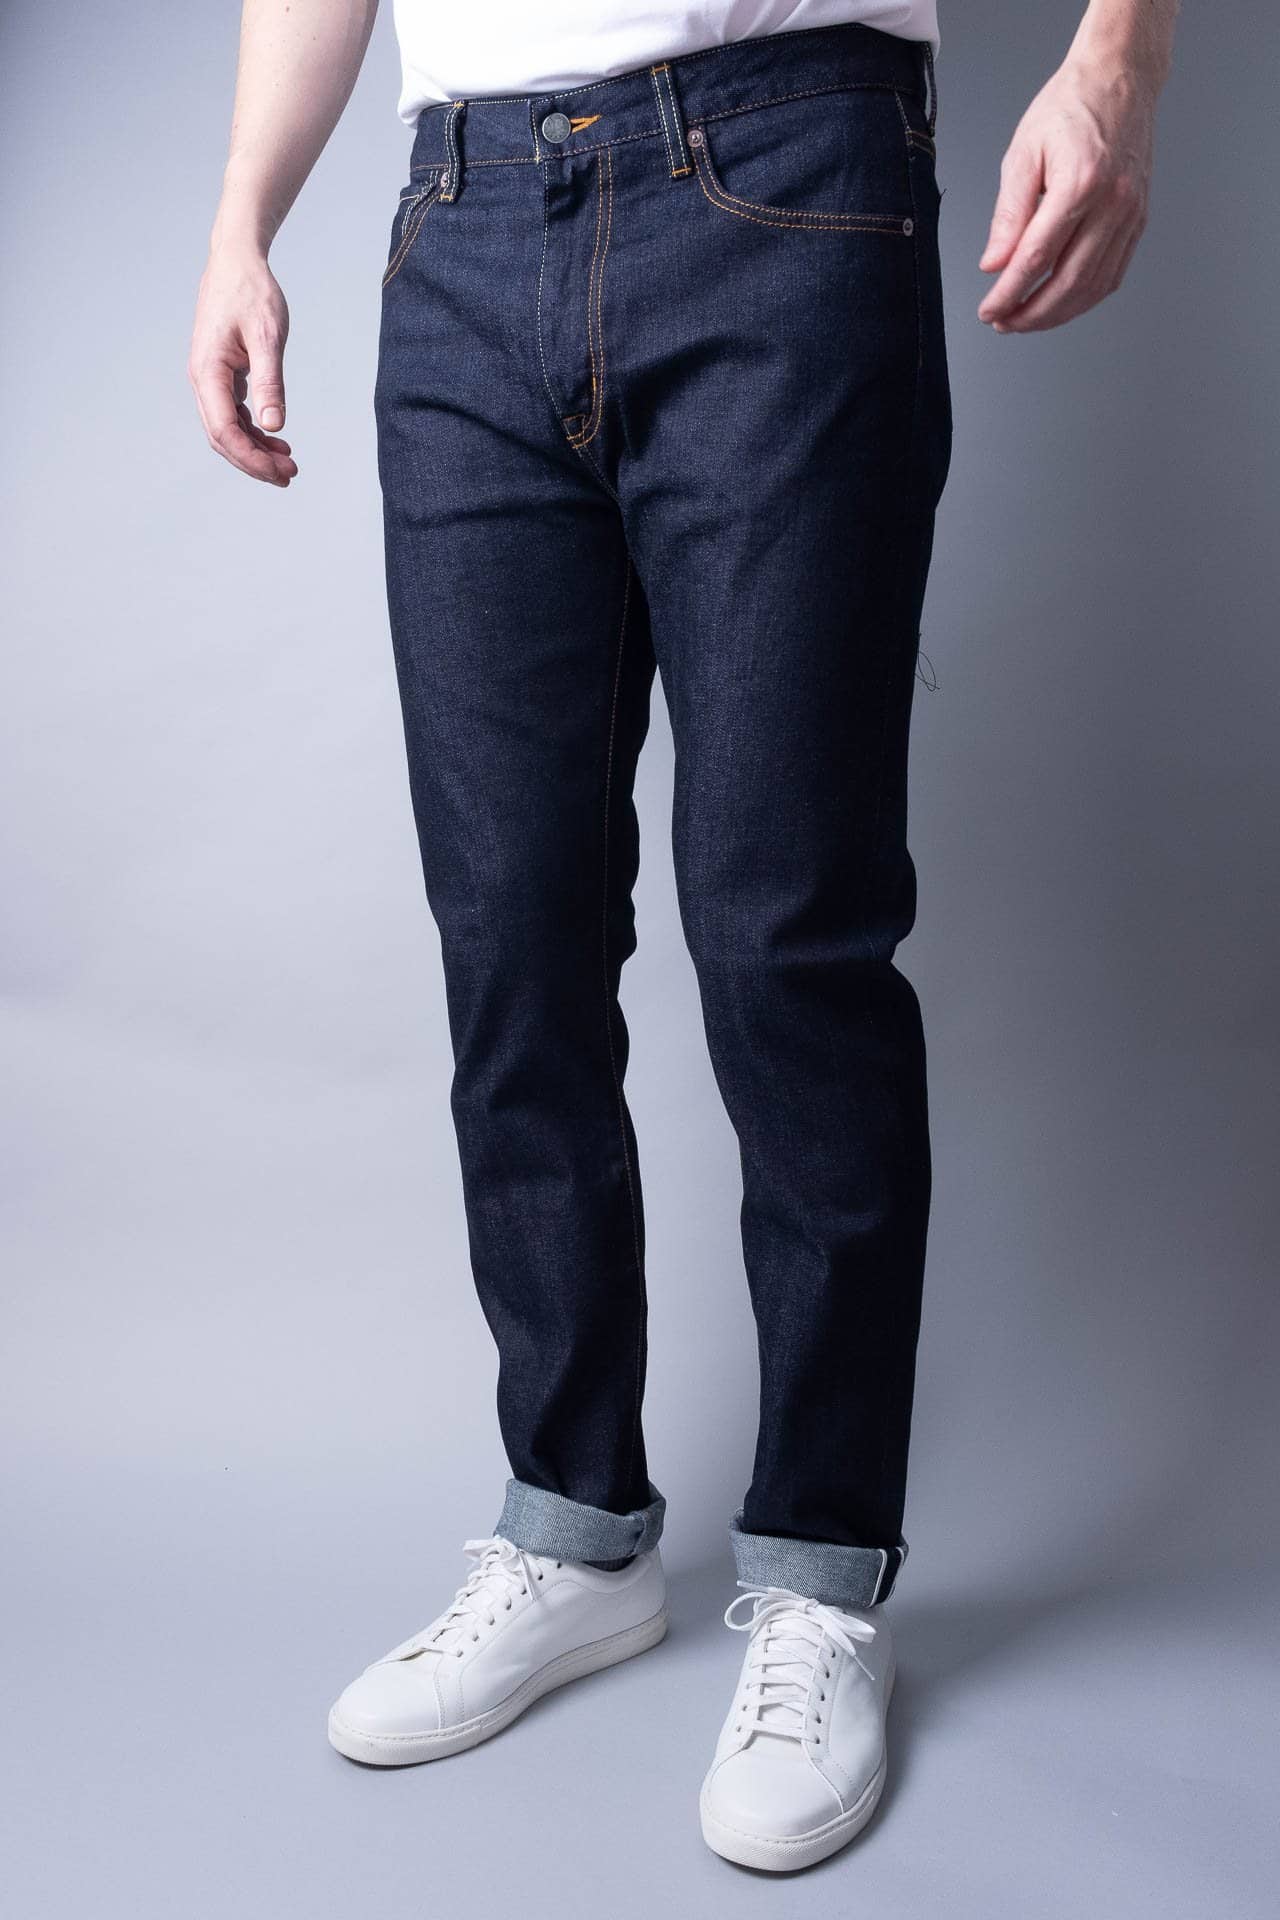 Selvage Denim - Built by you. Hand crafted by us.  Selvage denim, Men's  denim style, Mens fashion rugged